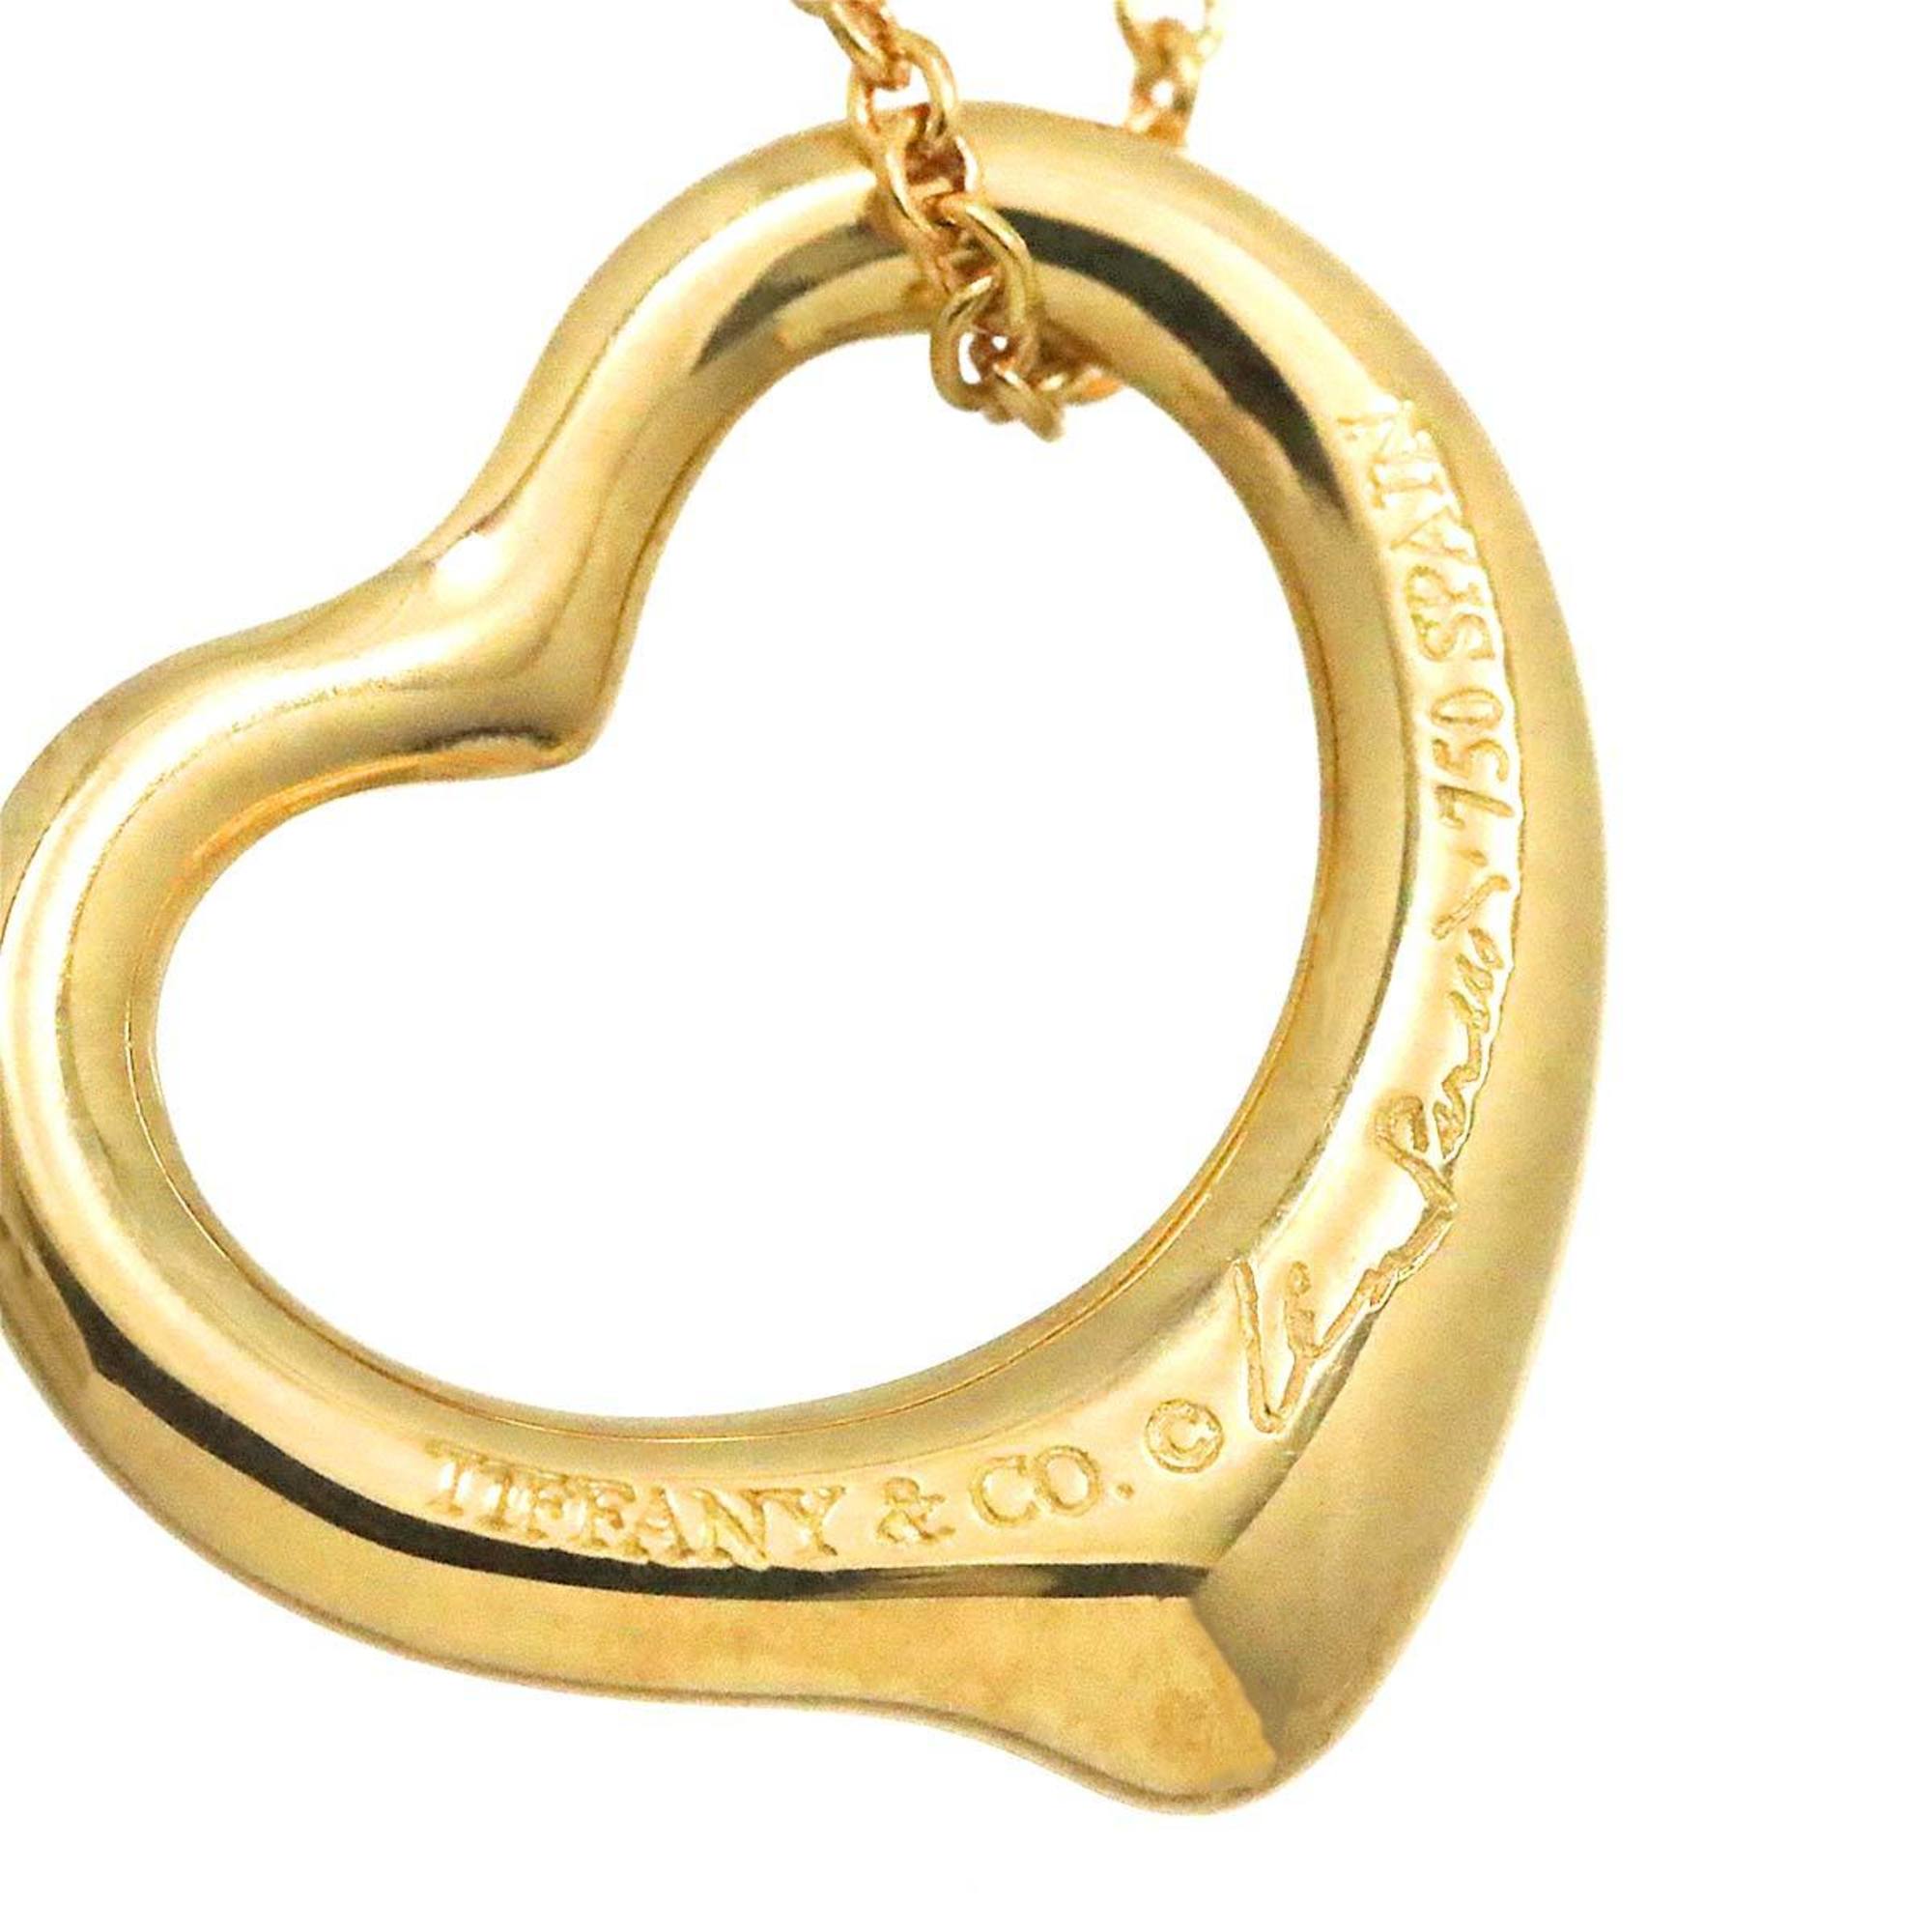 Tiffany & Co. Heart 15mm Necklace 40cm K18 YG Yellow Gold 750 Open